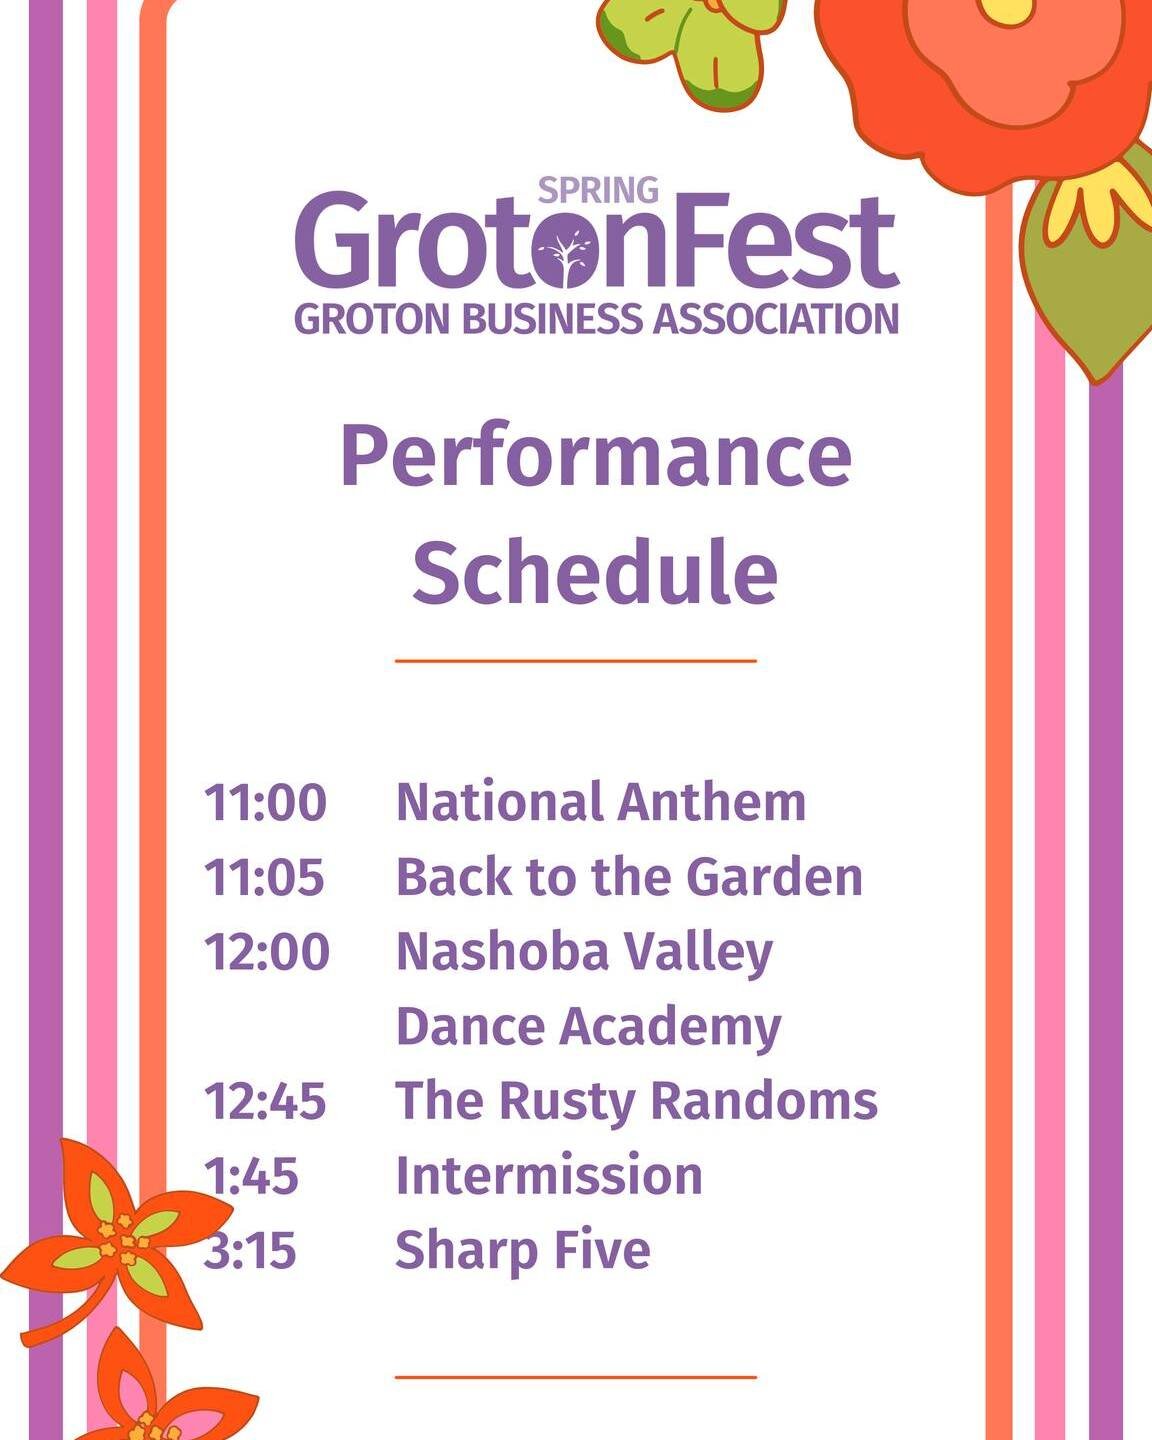 The stage will be buzzing at GrotonFest Spring! Who are you most excited to see?! ##newenglandspringevent #newenglandfestivals #grotonma #livemusic